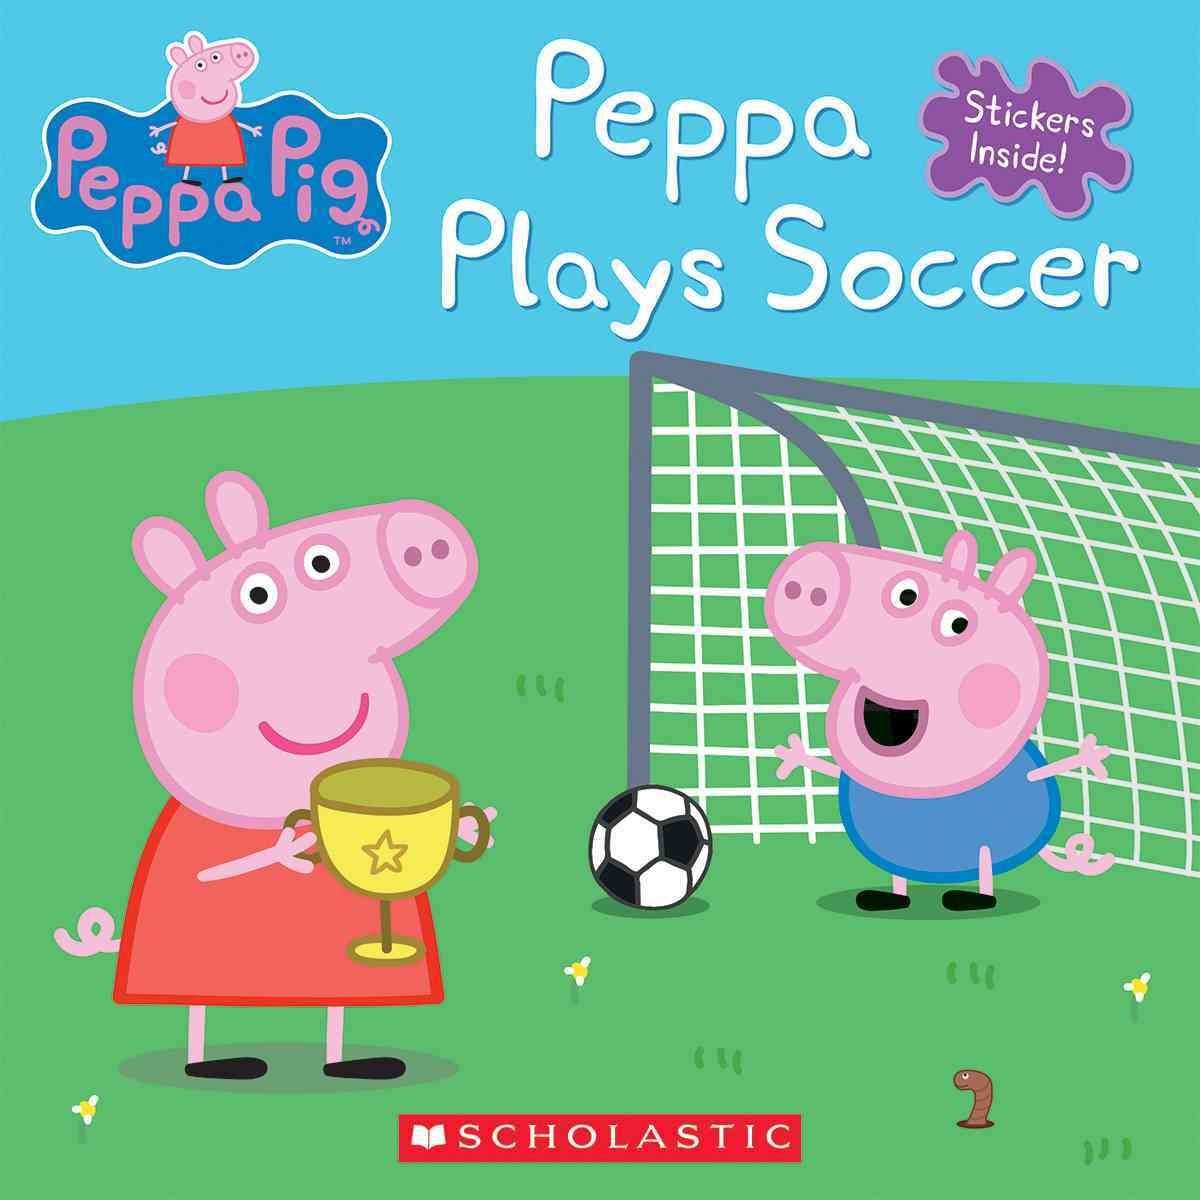 by　Delivery　Neville　Soccer　Plays　Peppa　Buy　Pig)　With　(Peppa　Astley　Free